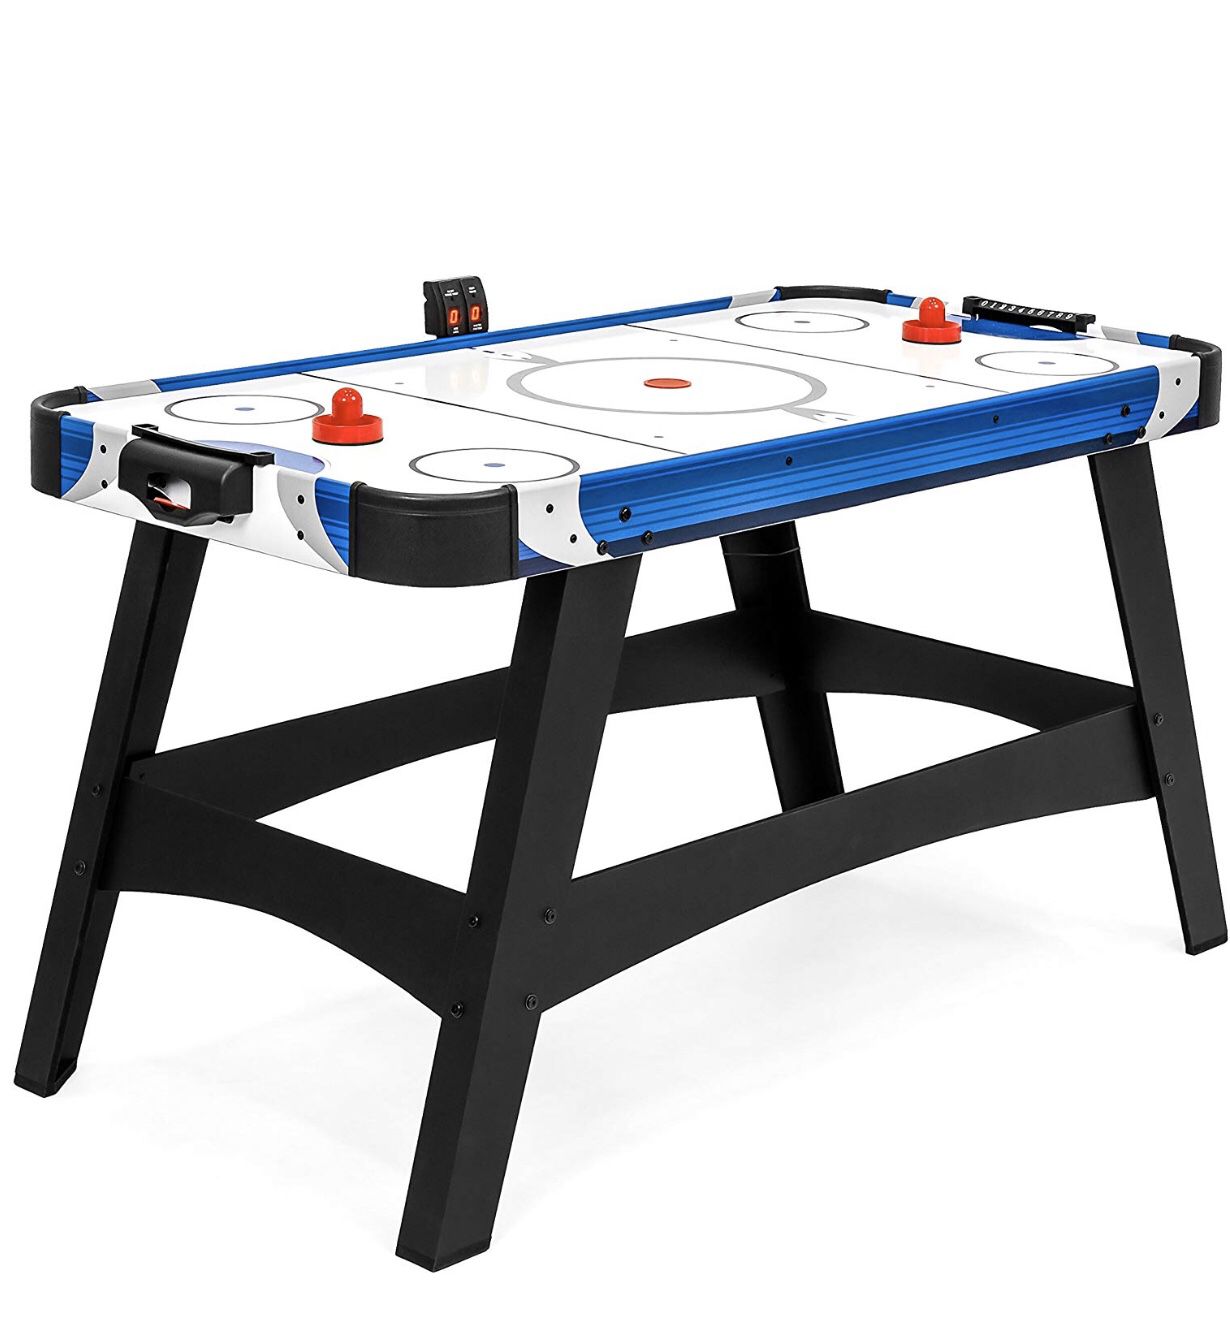 BRAND NEW 54in Air Hockey Table